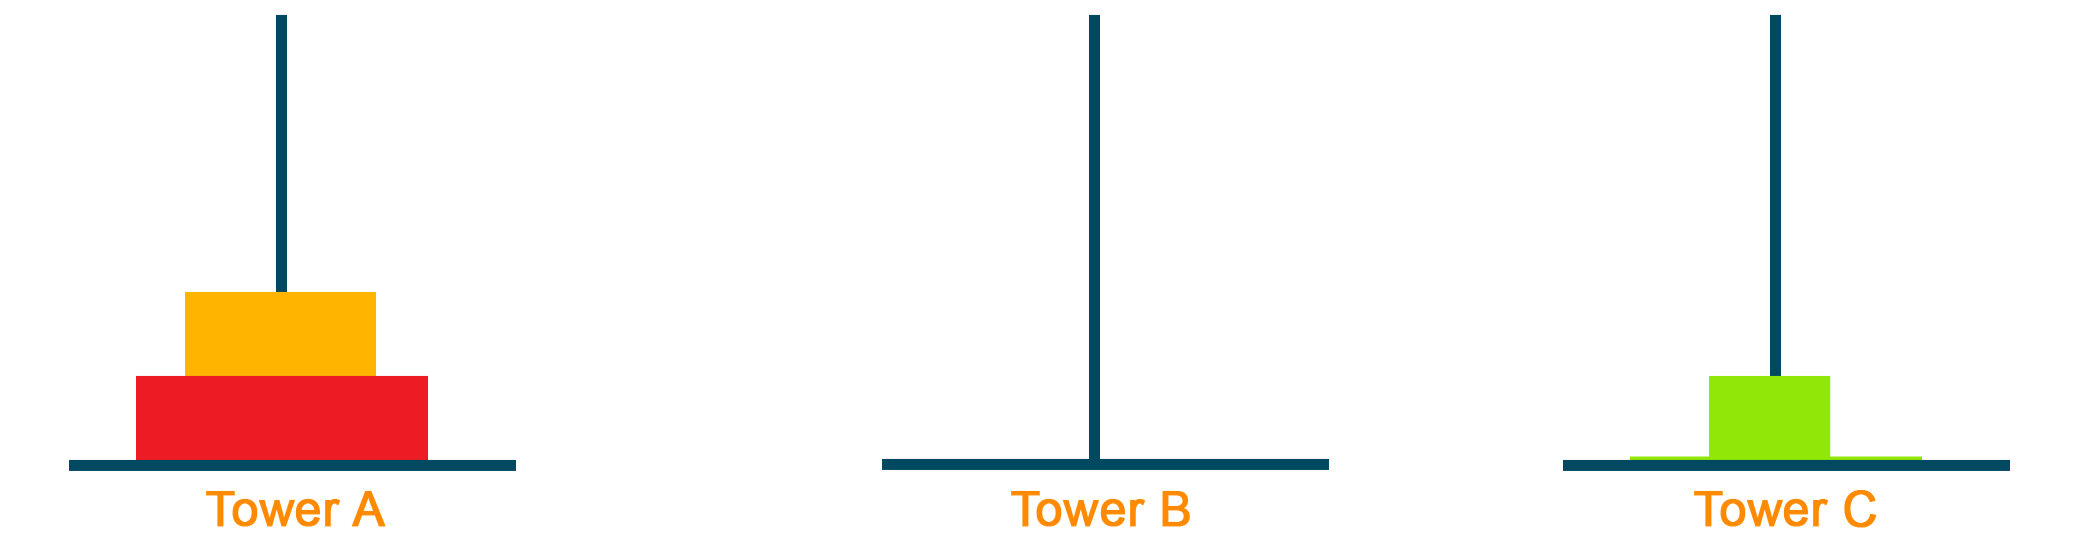 Moving smallest block to Tower C